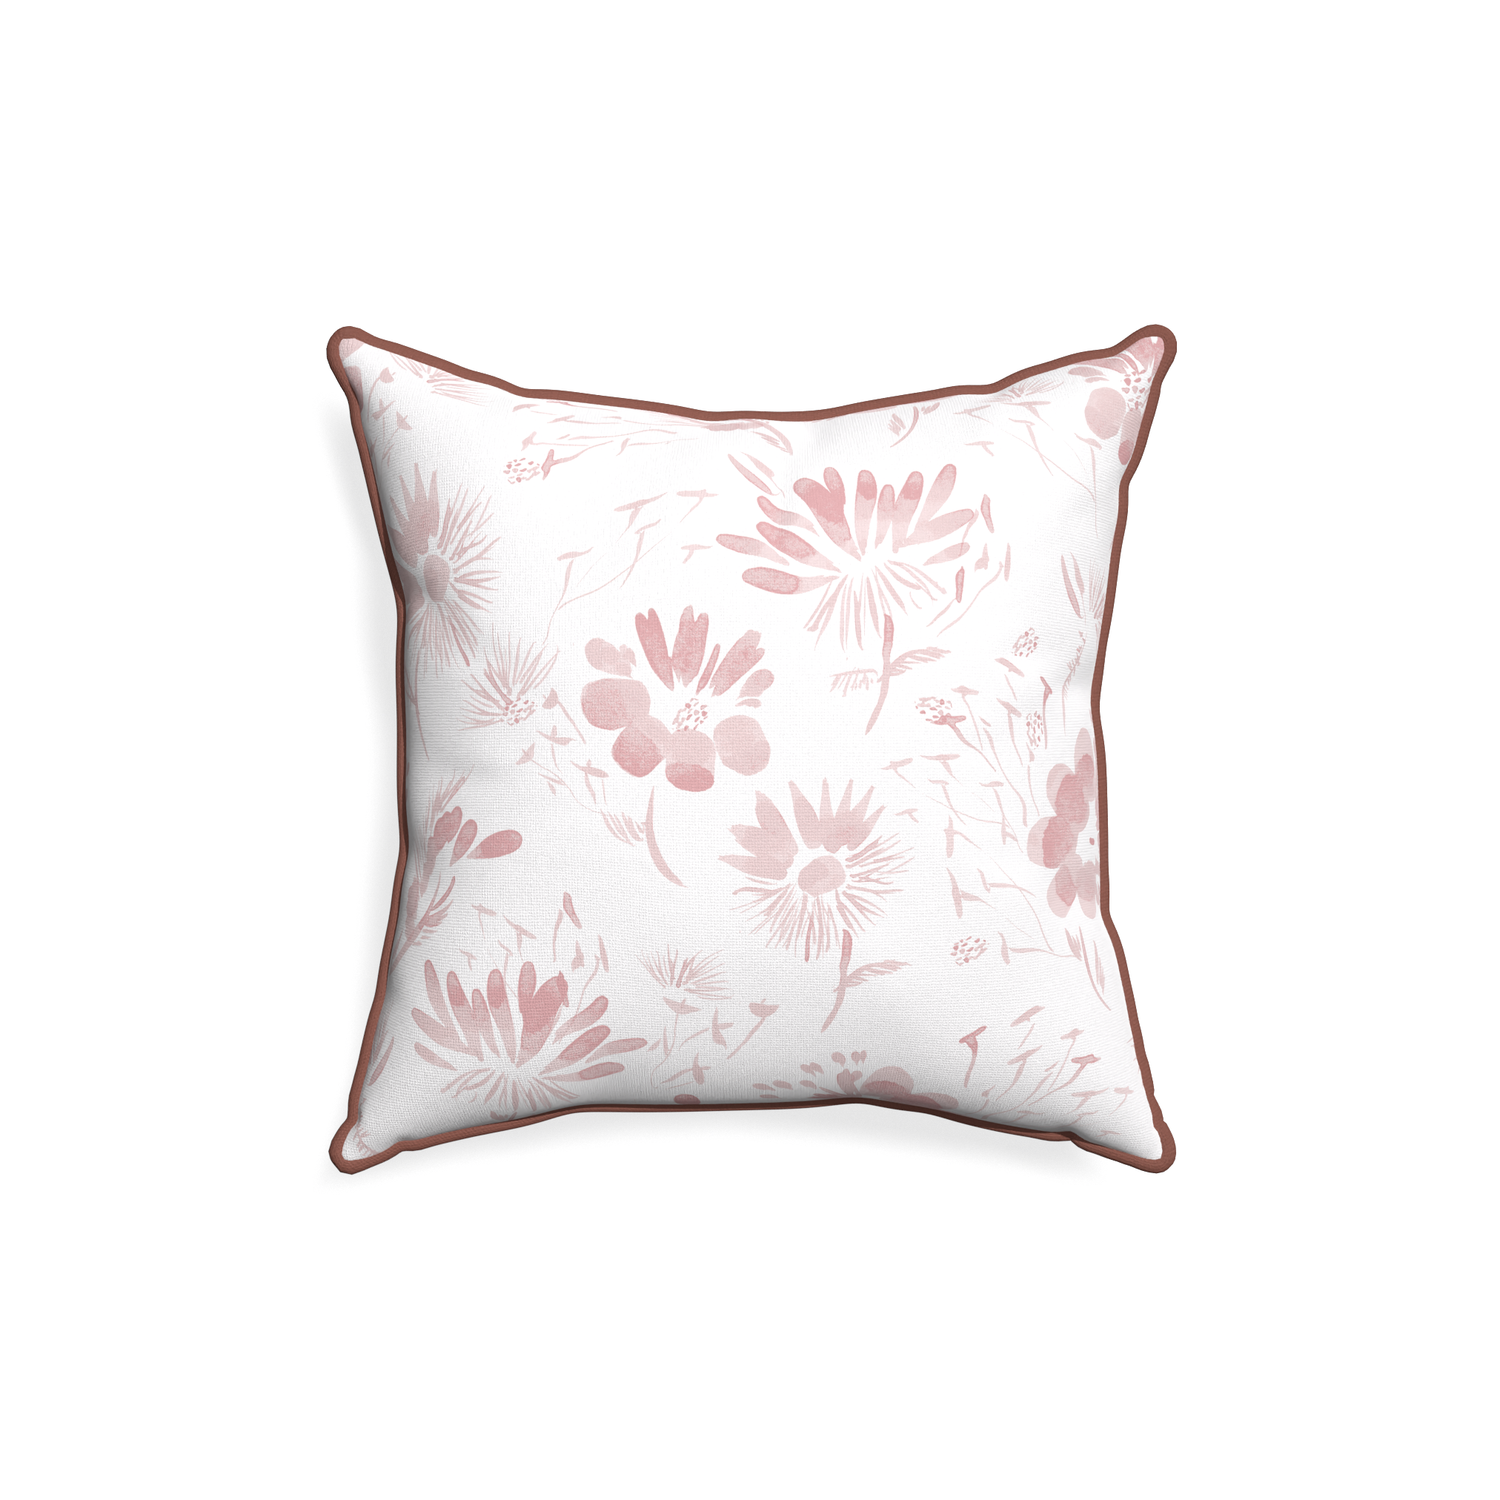 18-square blake custom pillow with w piping on white background